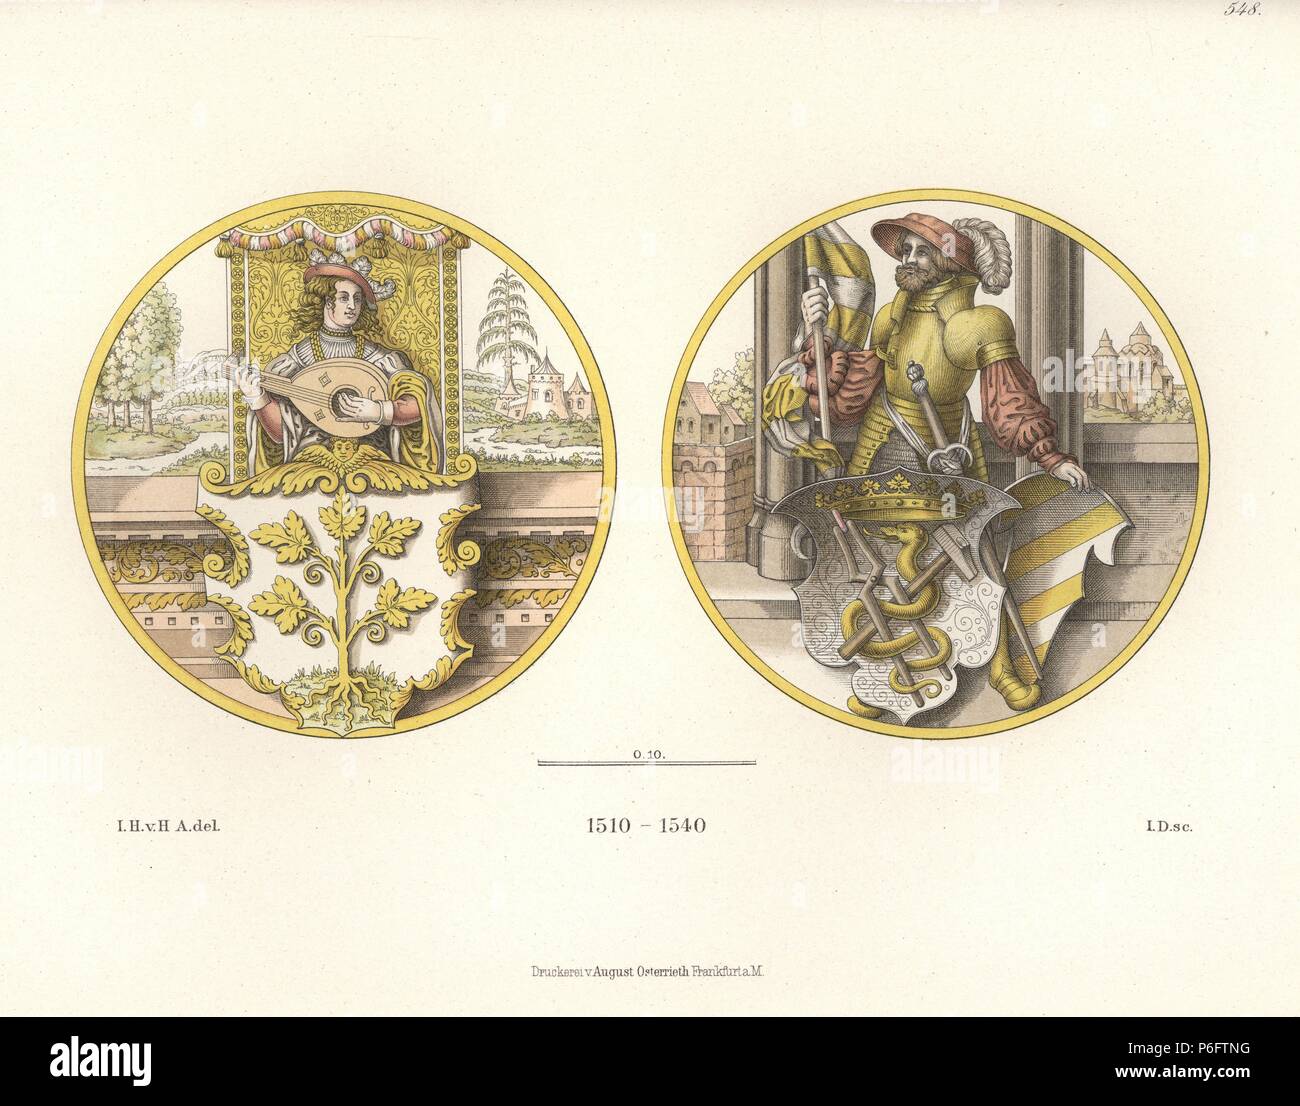 Glass paintings showing coats of arms with lute player and knight, early 16th century. The knight S. Florian holds the shield of a blacksmith's guild. Chromolithograph from Hefner-Alteneck's 'Costumes, Artworks and Appliances from the Middle Ages to the 17th Century,' Frankfurt, 1889. Illustration by Dr. Jakob Heinrich von Hefner-Alteneck, lithographed by L.D. Dr. Hefner-Alteneck (1811-1903) was a German museum curator, archaeologist, art historian, illustrator and etcher. Stock Photo